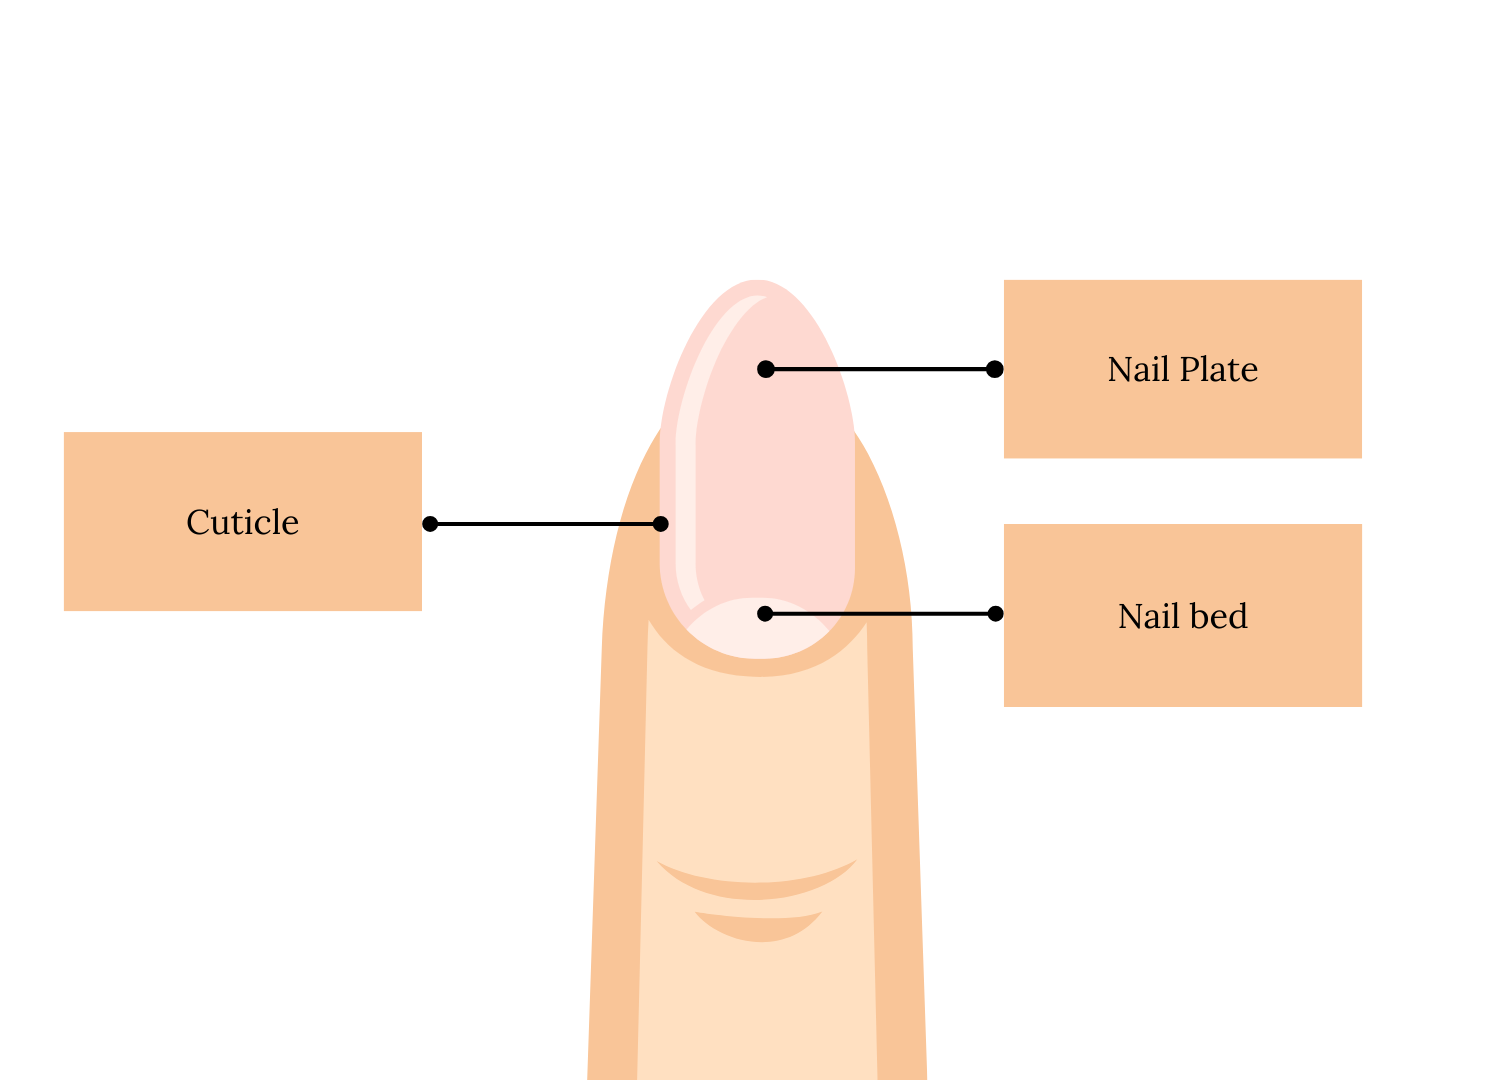 Example diagram illustrating the structure of a fingernail